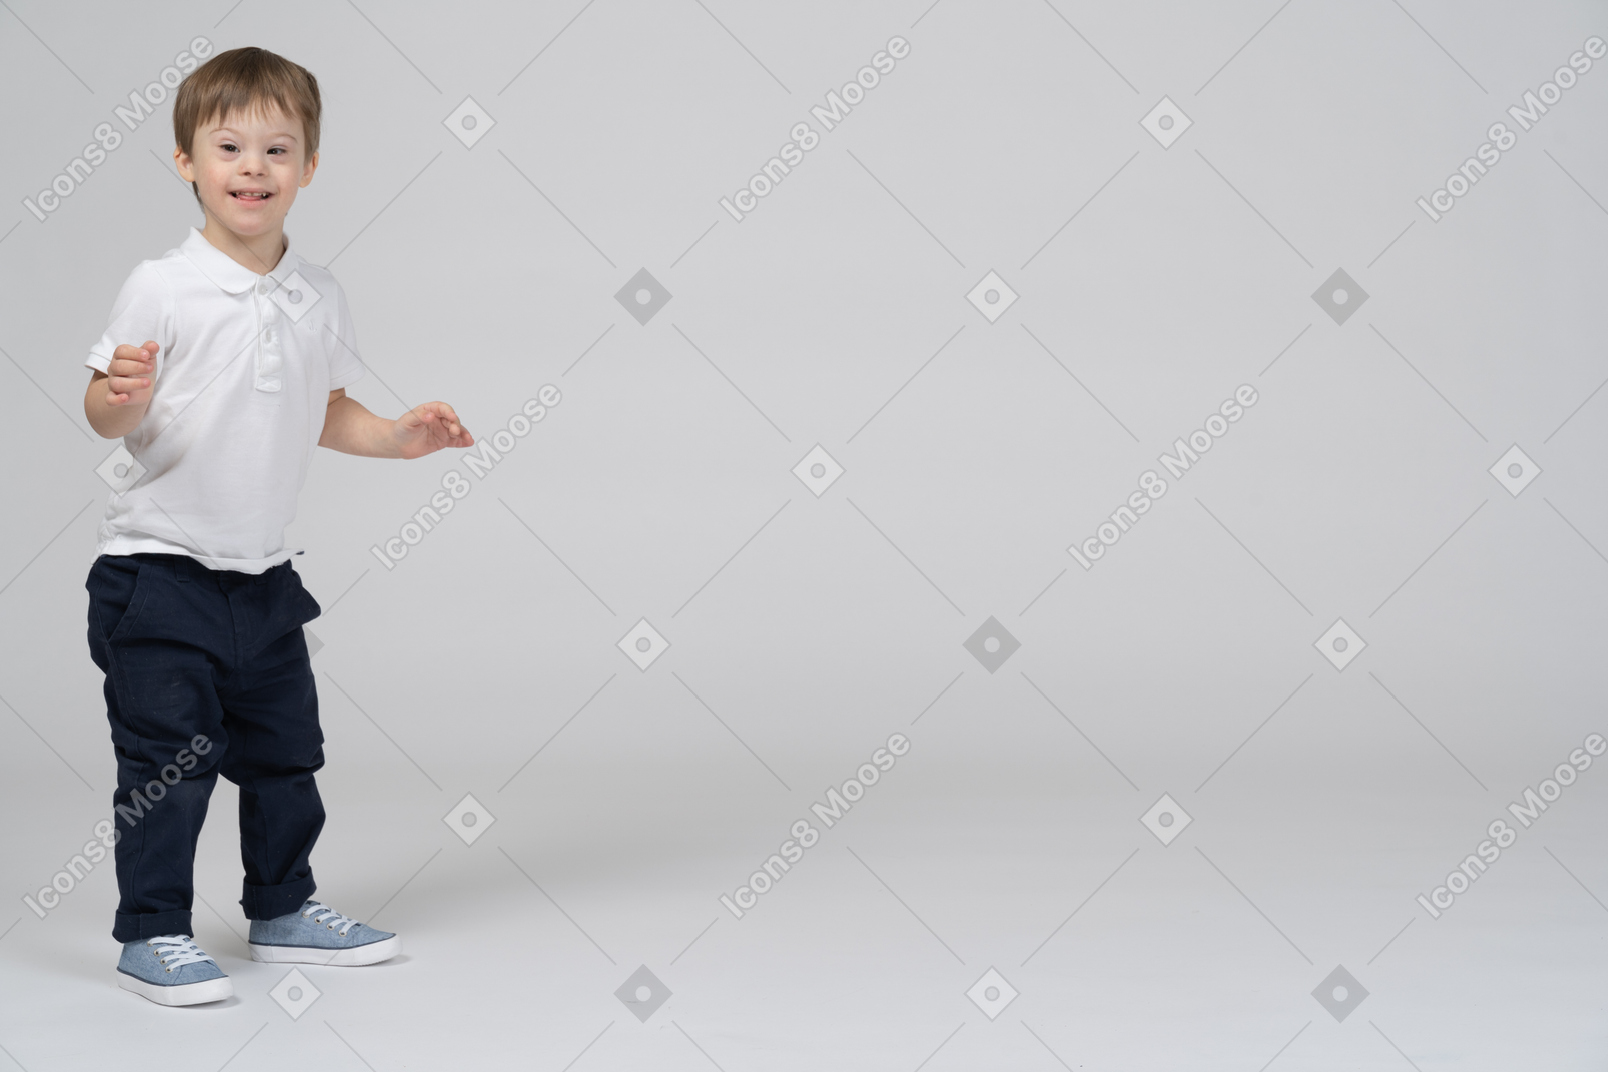 Excited little boy with raised arms